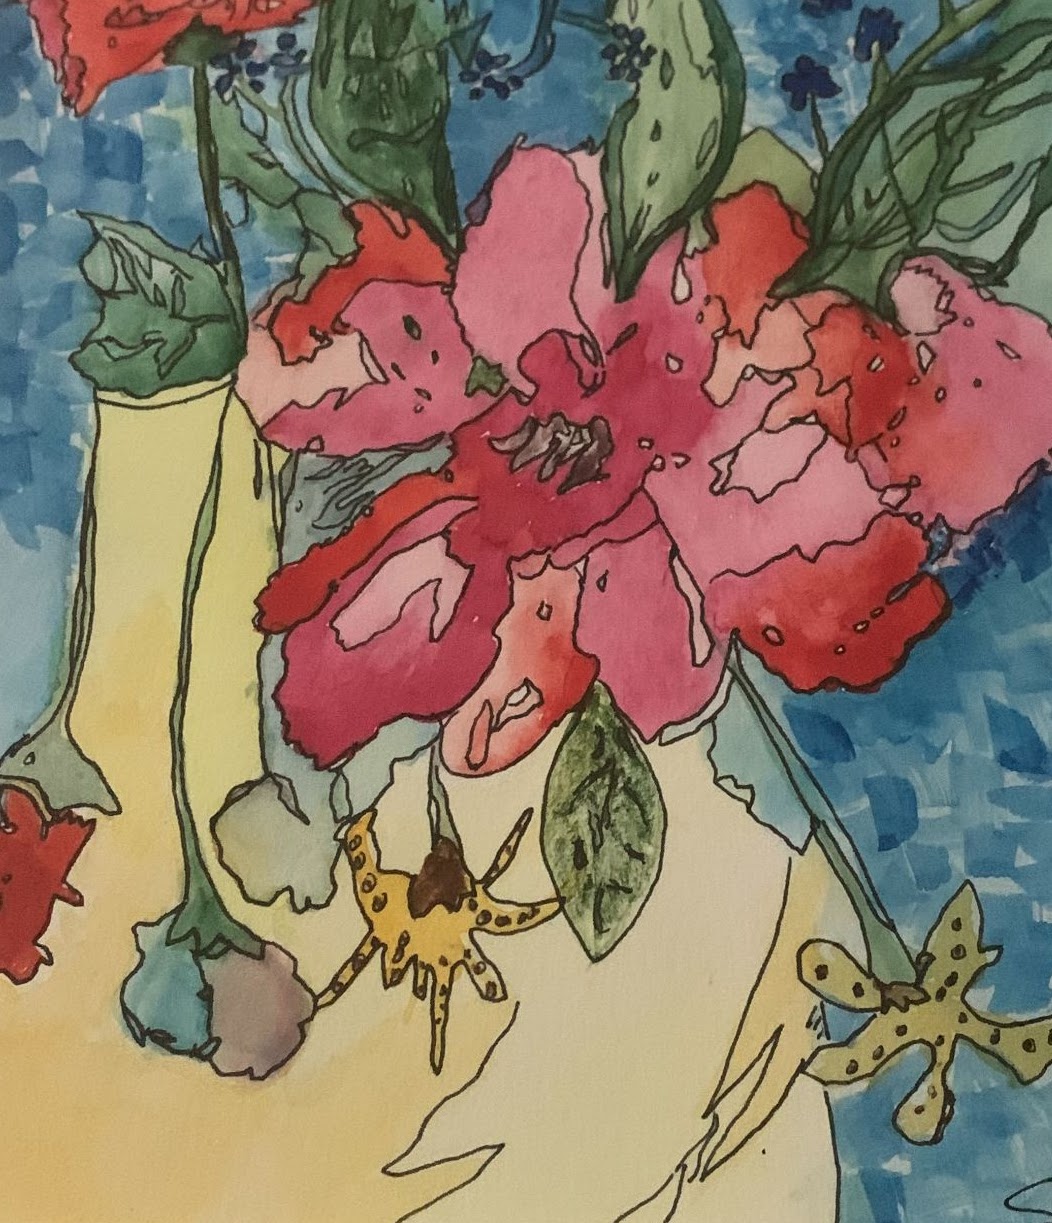 In the center of the page is a large, red flower in a light yellow vase. Green leaves and stems fan out from the large flower and there is a smaller red flower in the top left corner. Some small, wilted yellow and red flowers hang down from the vase, below the big red flower. The background is blue and looks a bit like a mosaic.